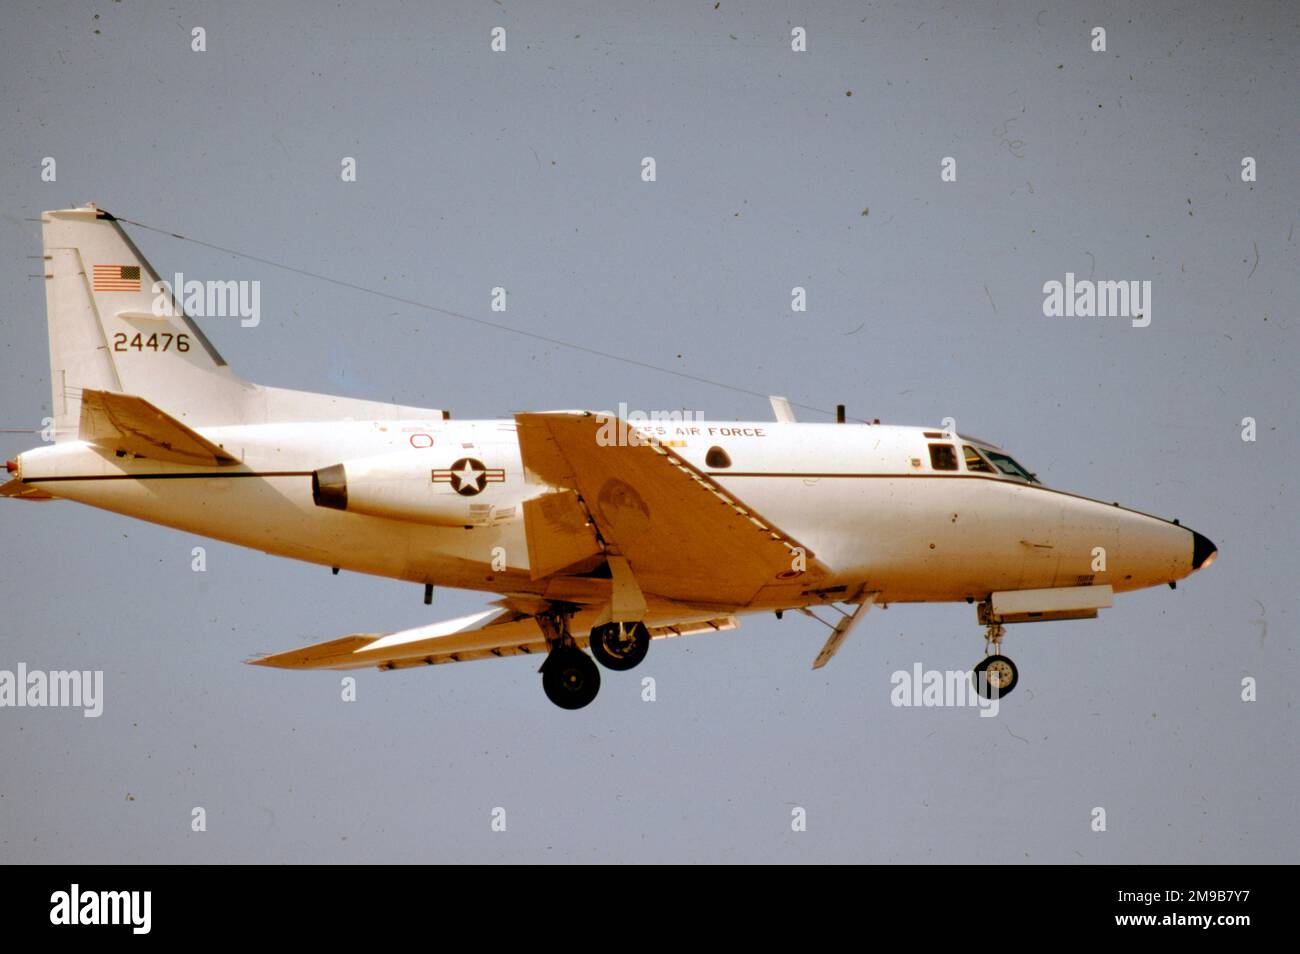 United States Air Force (USAF) - North American T-39A-1-NO Sabreliner 62-4476 (msn 276-29), Stock Photo